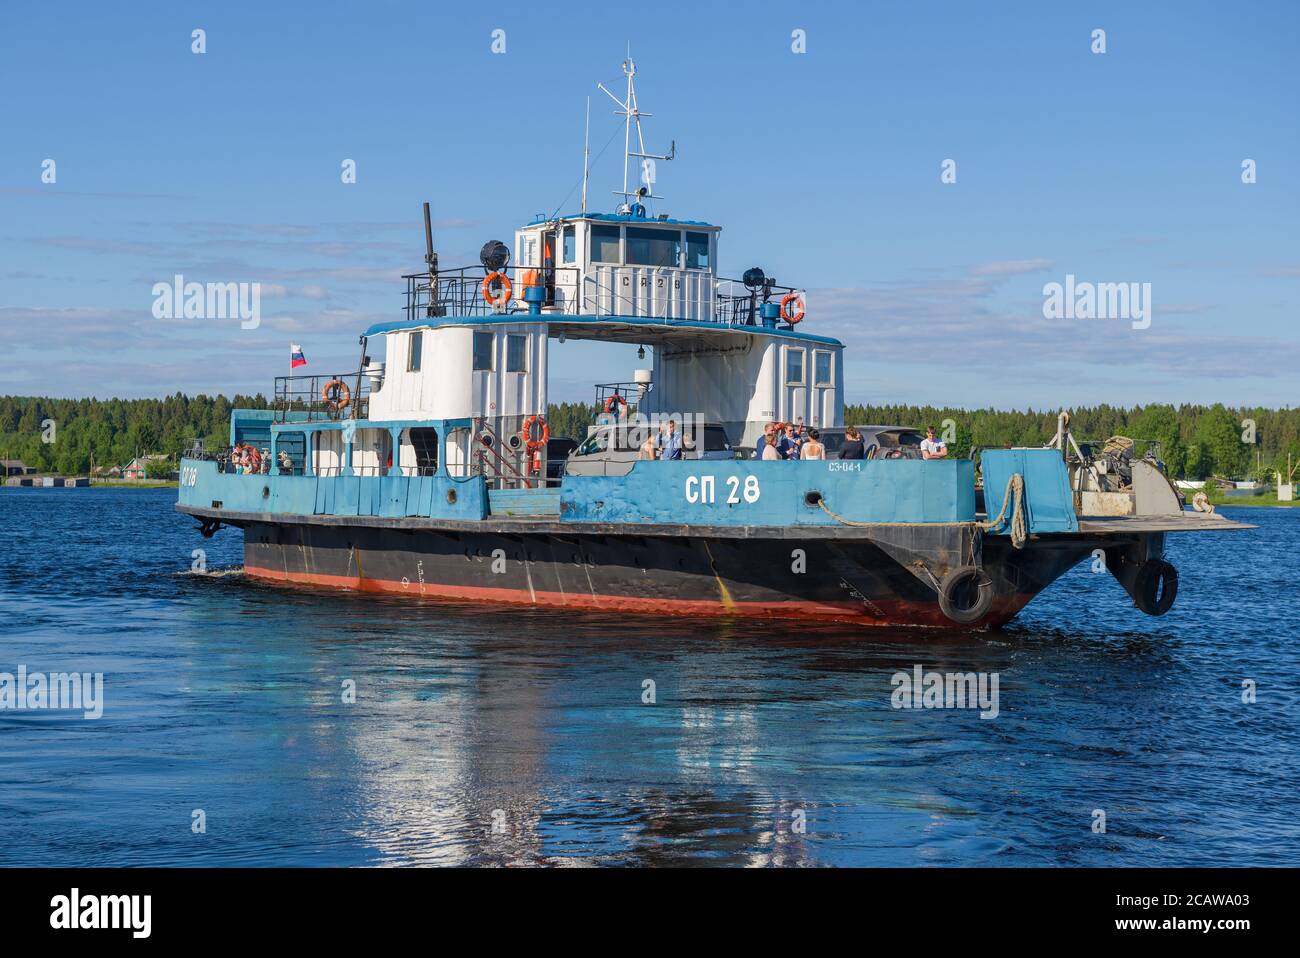 VOZNESENIE, RUSSIA - JUNE 13, 2020: Car and passenger ferry SP-28 on the Svir river close up on a sunny June day Stock Photo